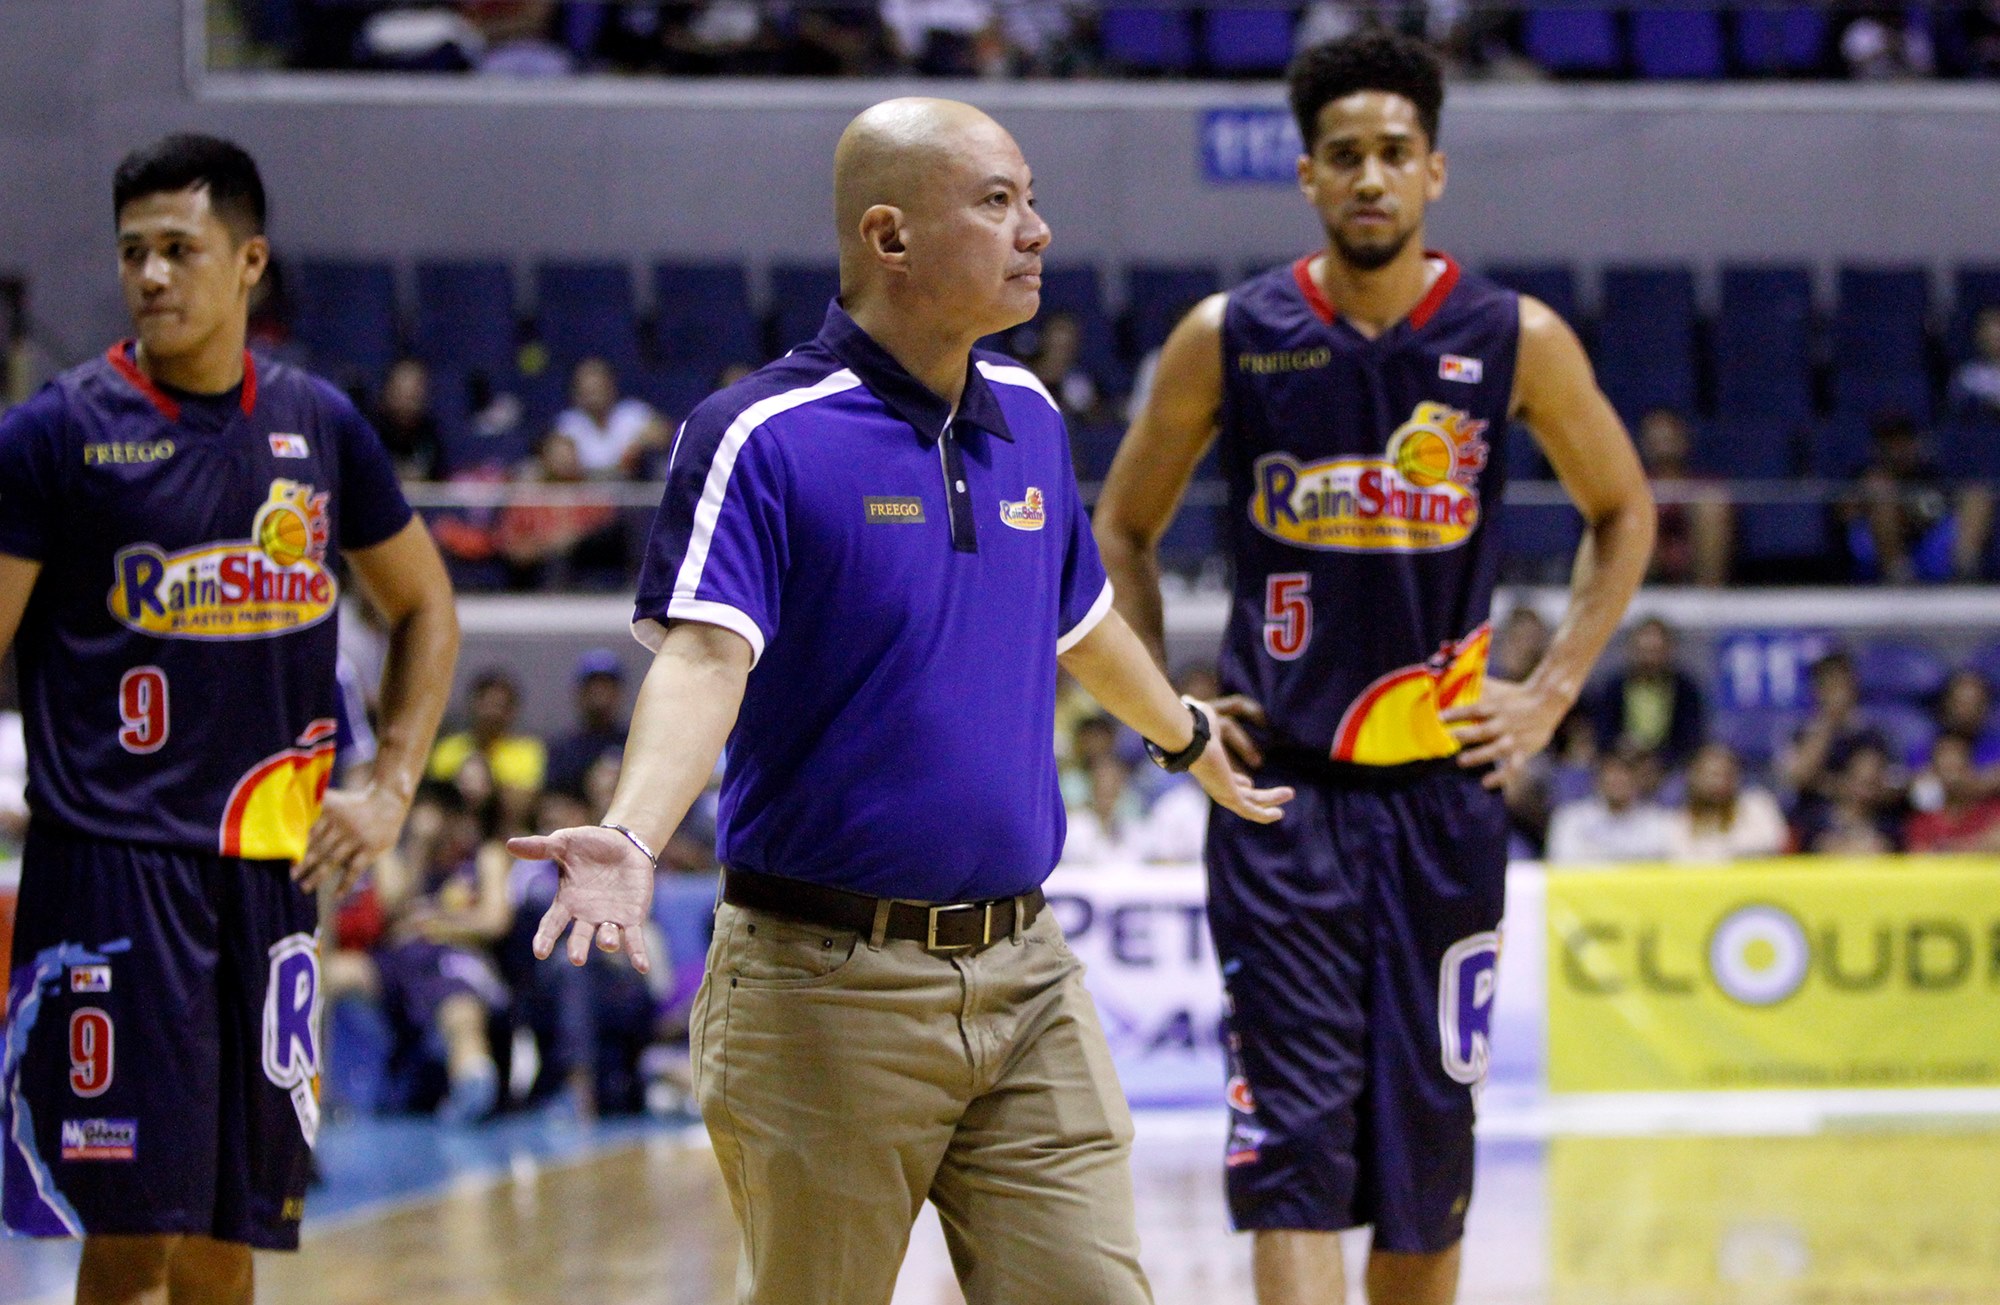 Former Rain or Shine coach and now NLEX mentor Yeng Guiao. PBA IMAGES